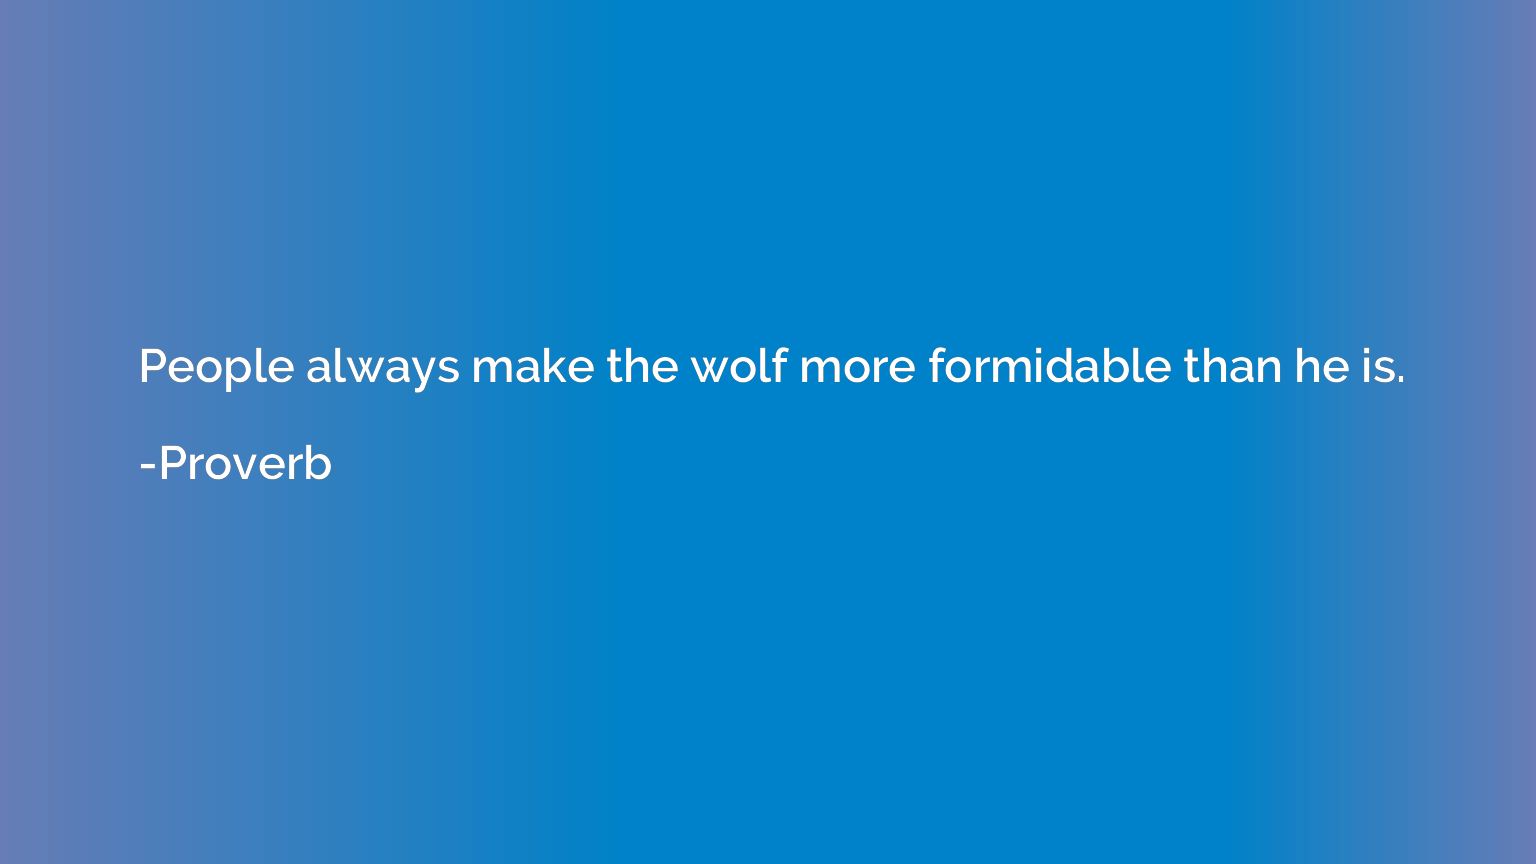 People always make the wolf more formidable than he is.